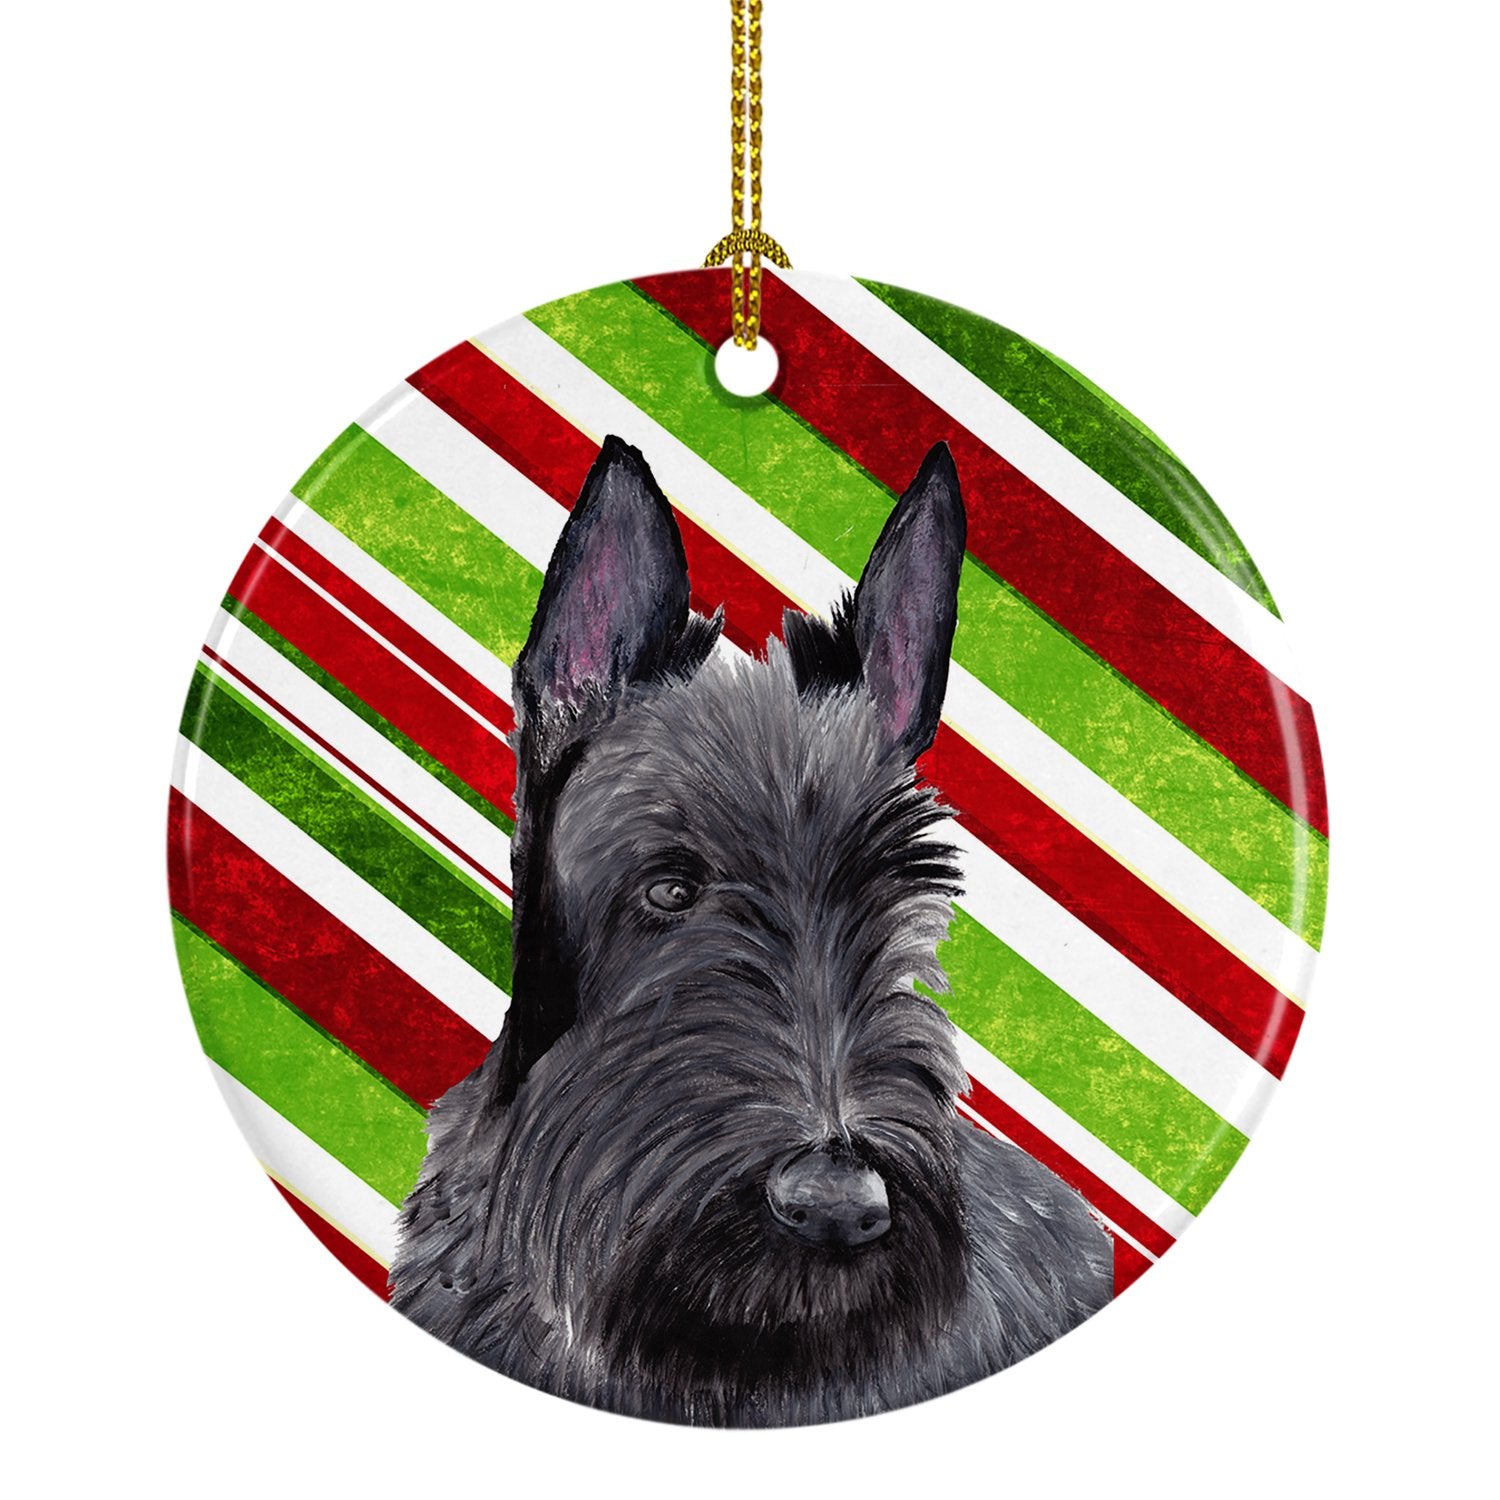 Scottish Terrier Candy Cane Holiday Christmas  Ceramic Ornament SC9346 by Caroline's Treasures